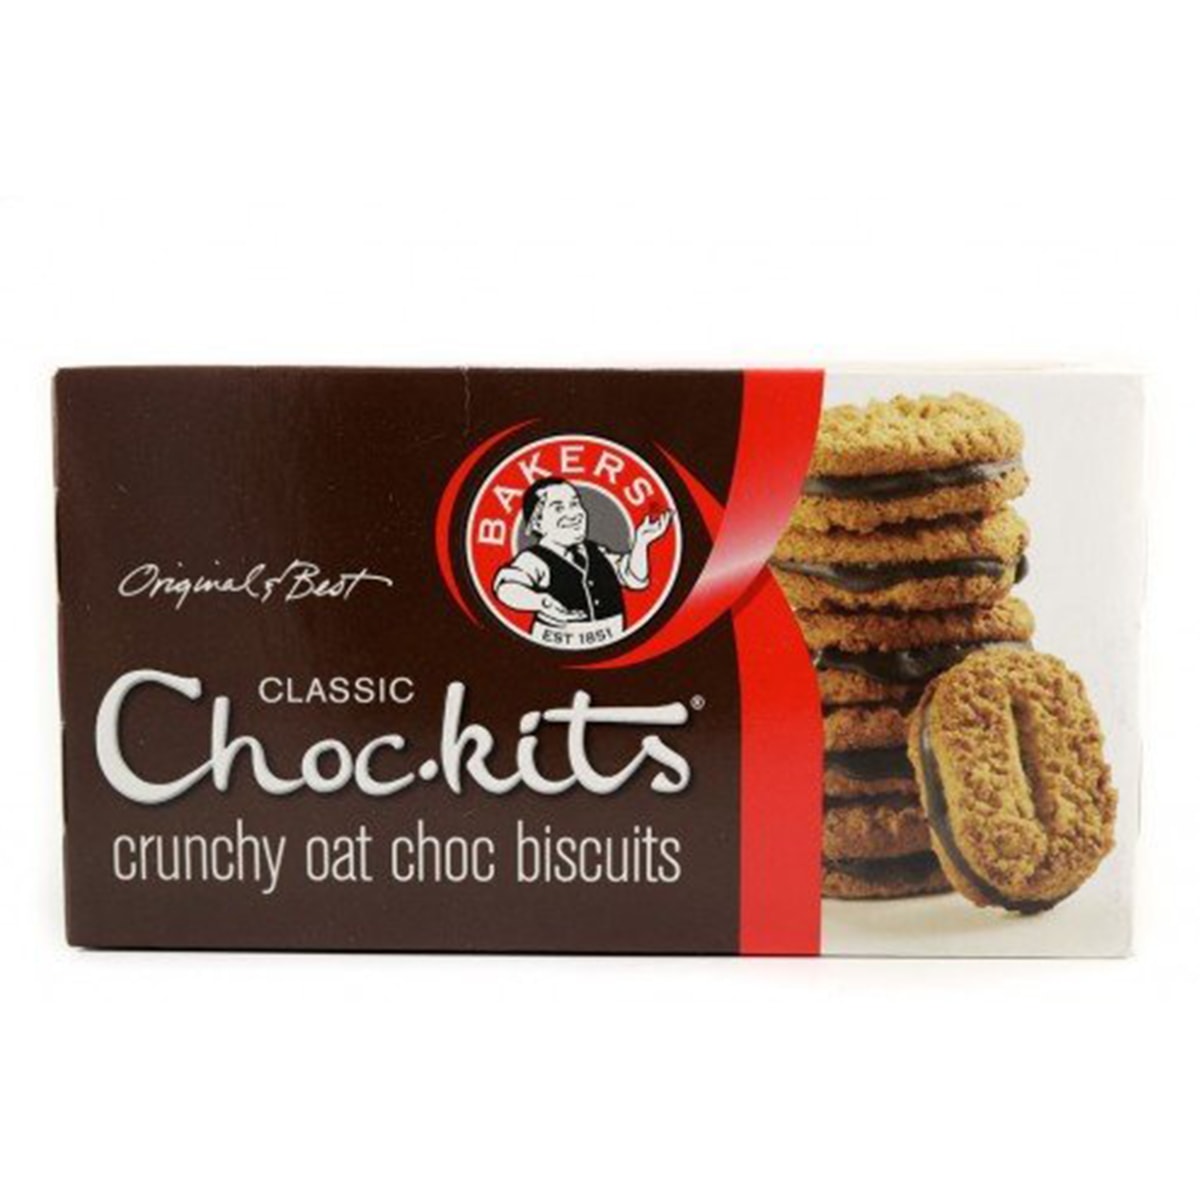 Buy Bakers Choc Kits Classic Crunchy Oat Choc Biscuits - 200 gm